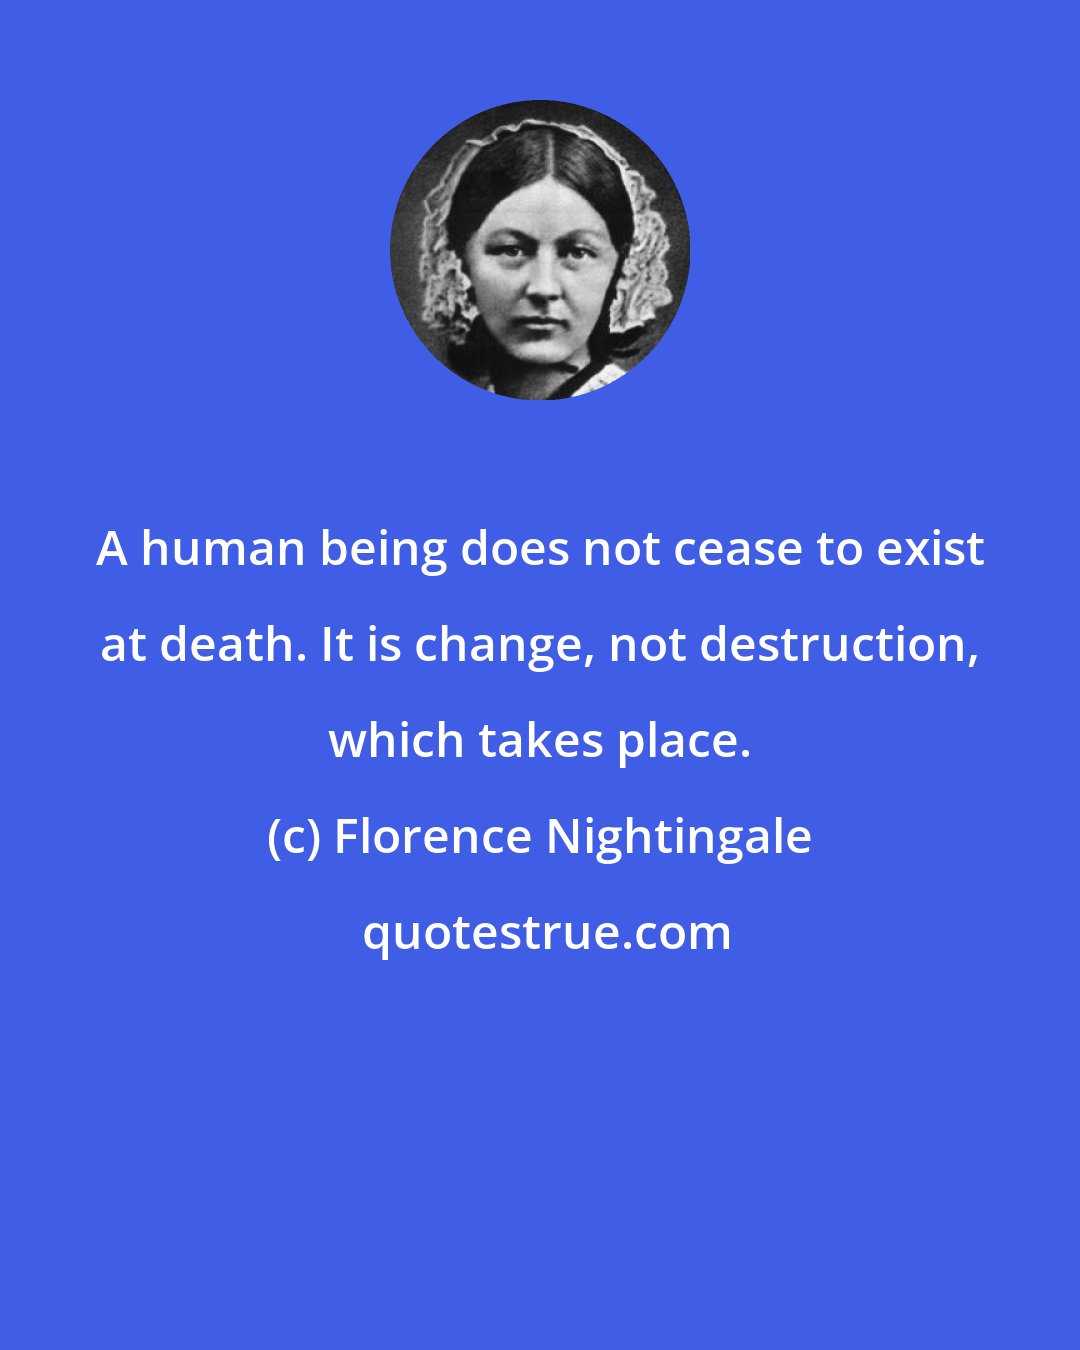 Florence Nightingale: A human being does not cease to exist at death. It is change, not destruction, which takes place.